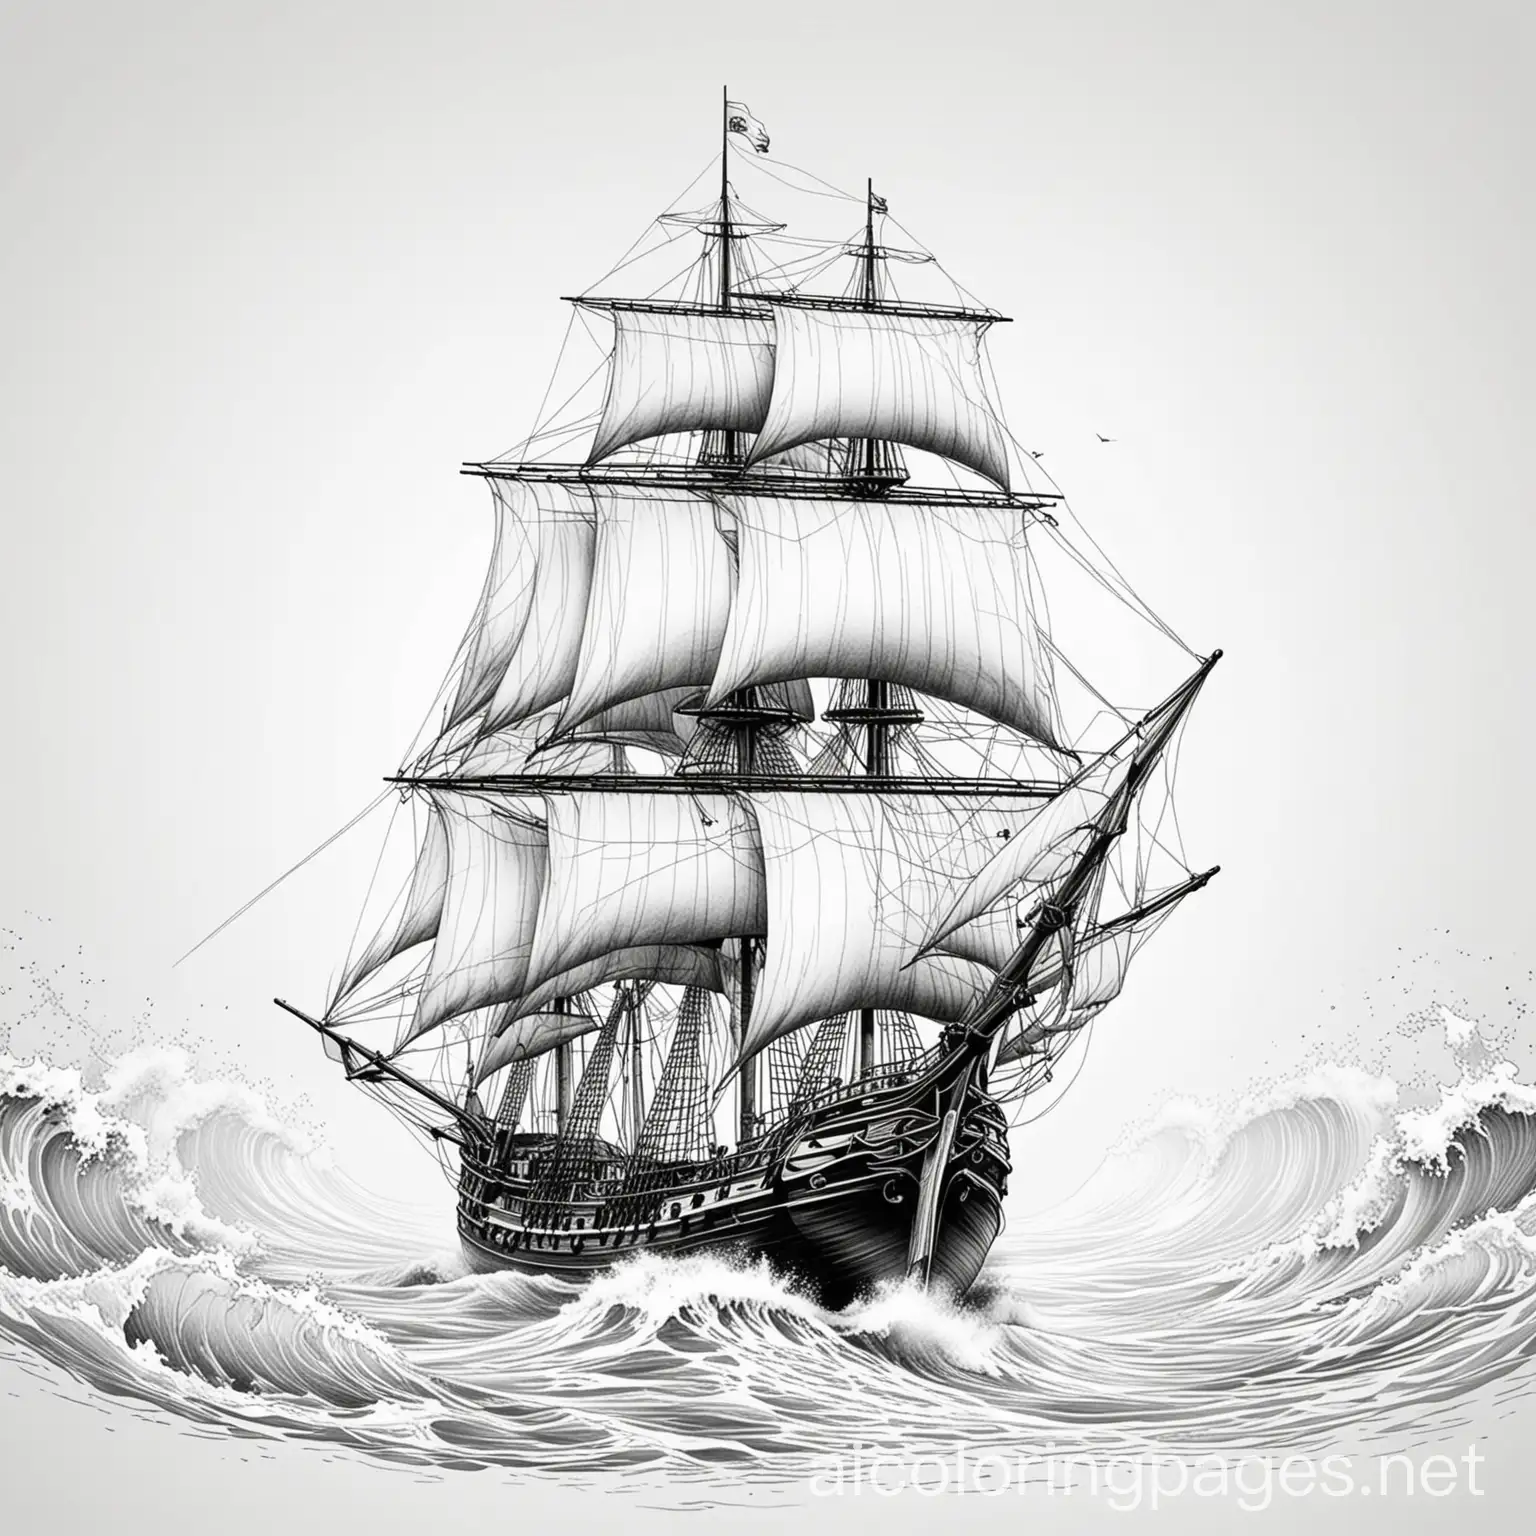 Barco de vela surcando los mares, Coloring Page, black and white, line art, white background, Simplicity, Ample White Space. The background of the coloring page is plain white to make it easy for young children to color within the lines. The outlines of all the subjects are easy to distinguish, making it simple for kids to color without too much difficulty